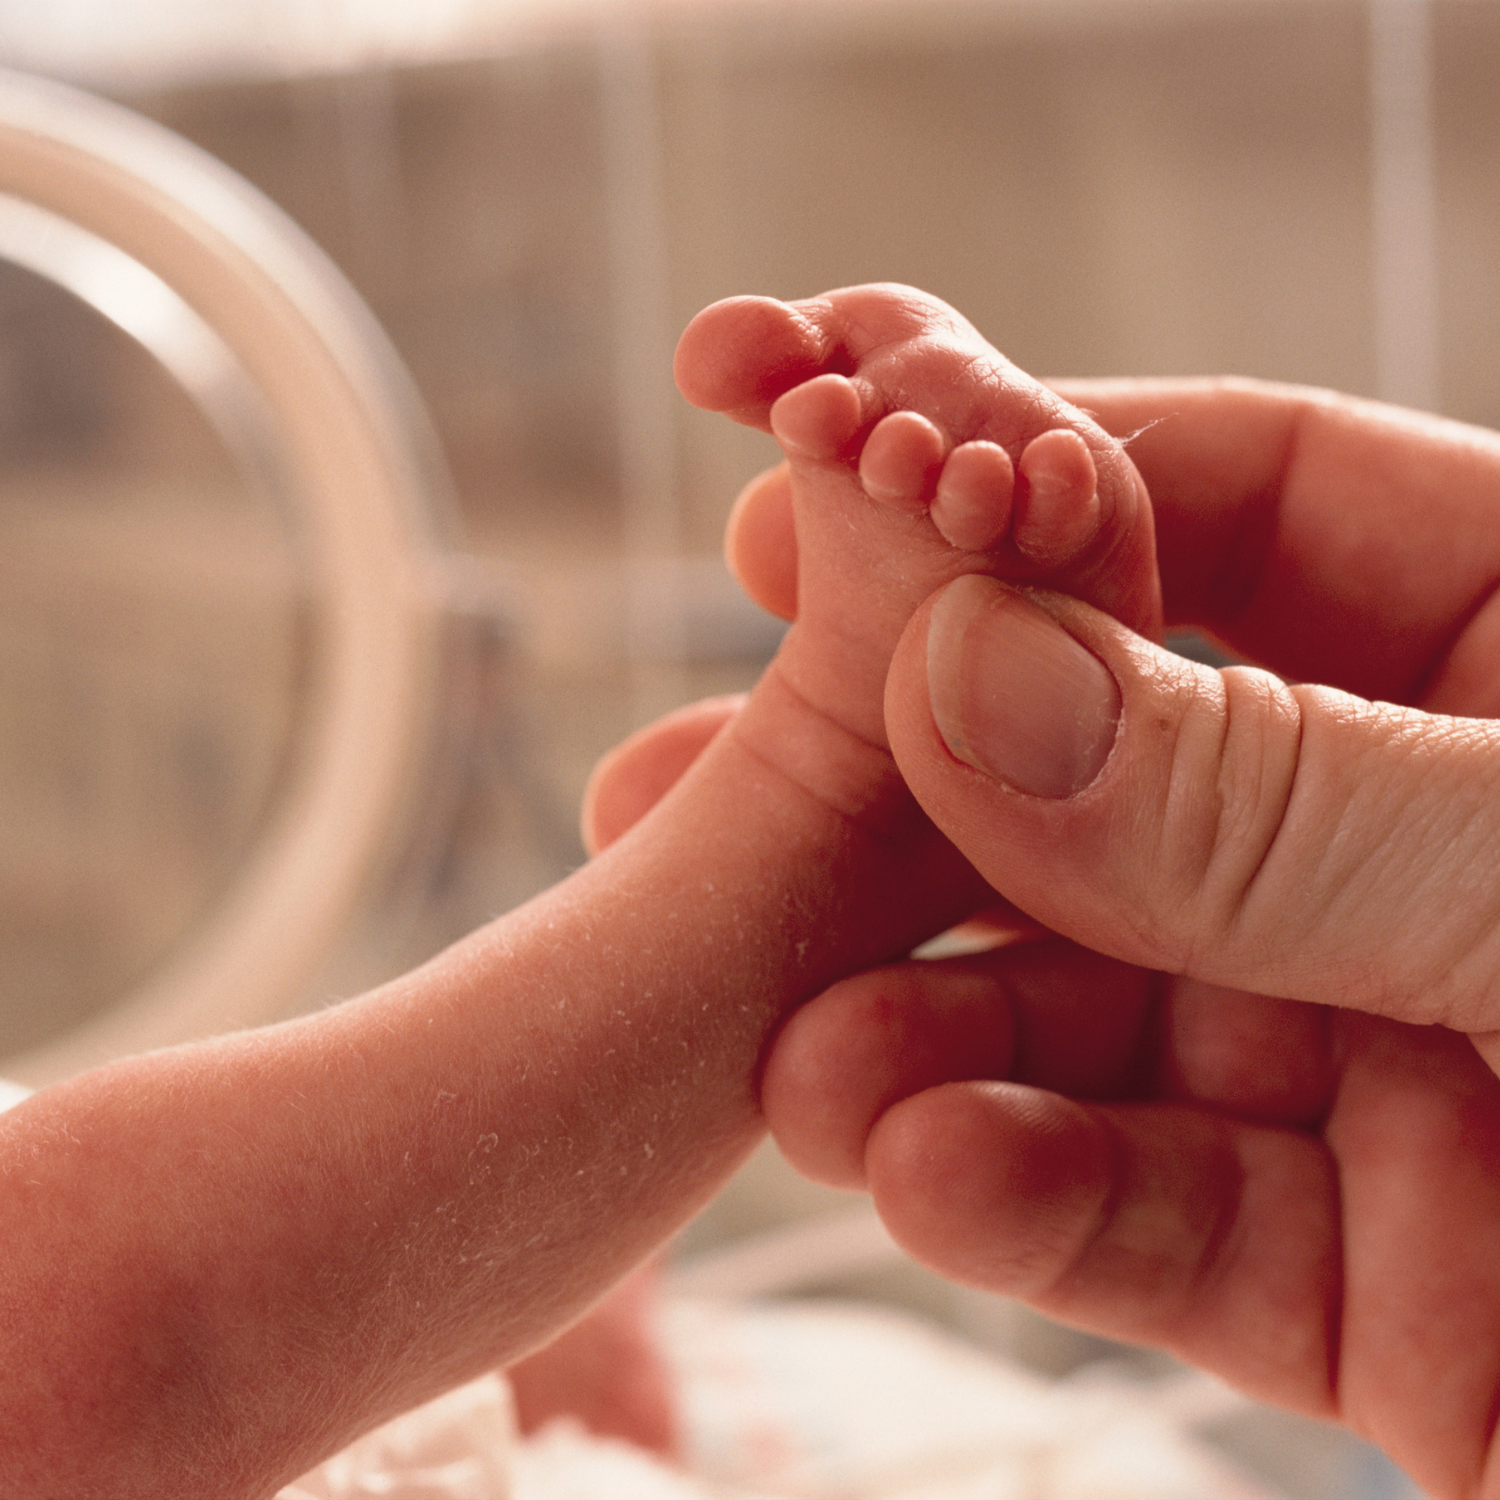 Mom to Mom: 8 Pumping Tips From a Preemie Mom